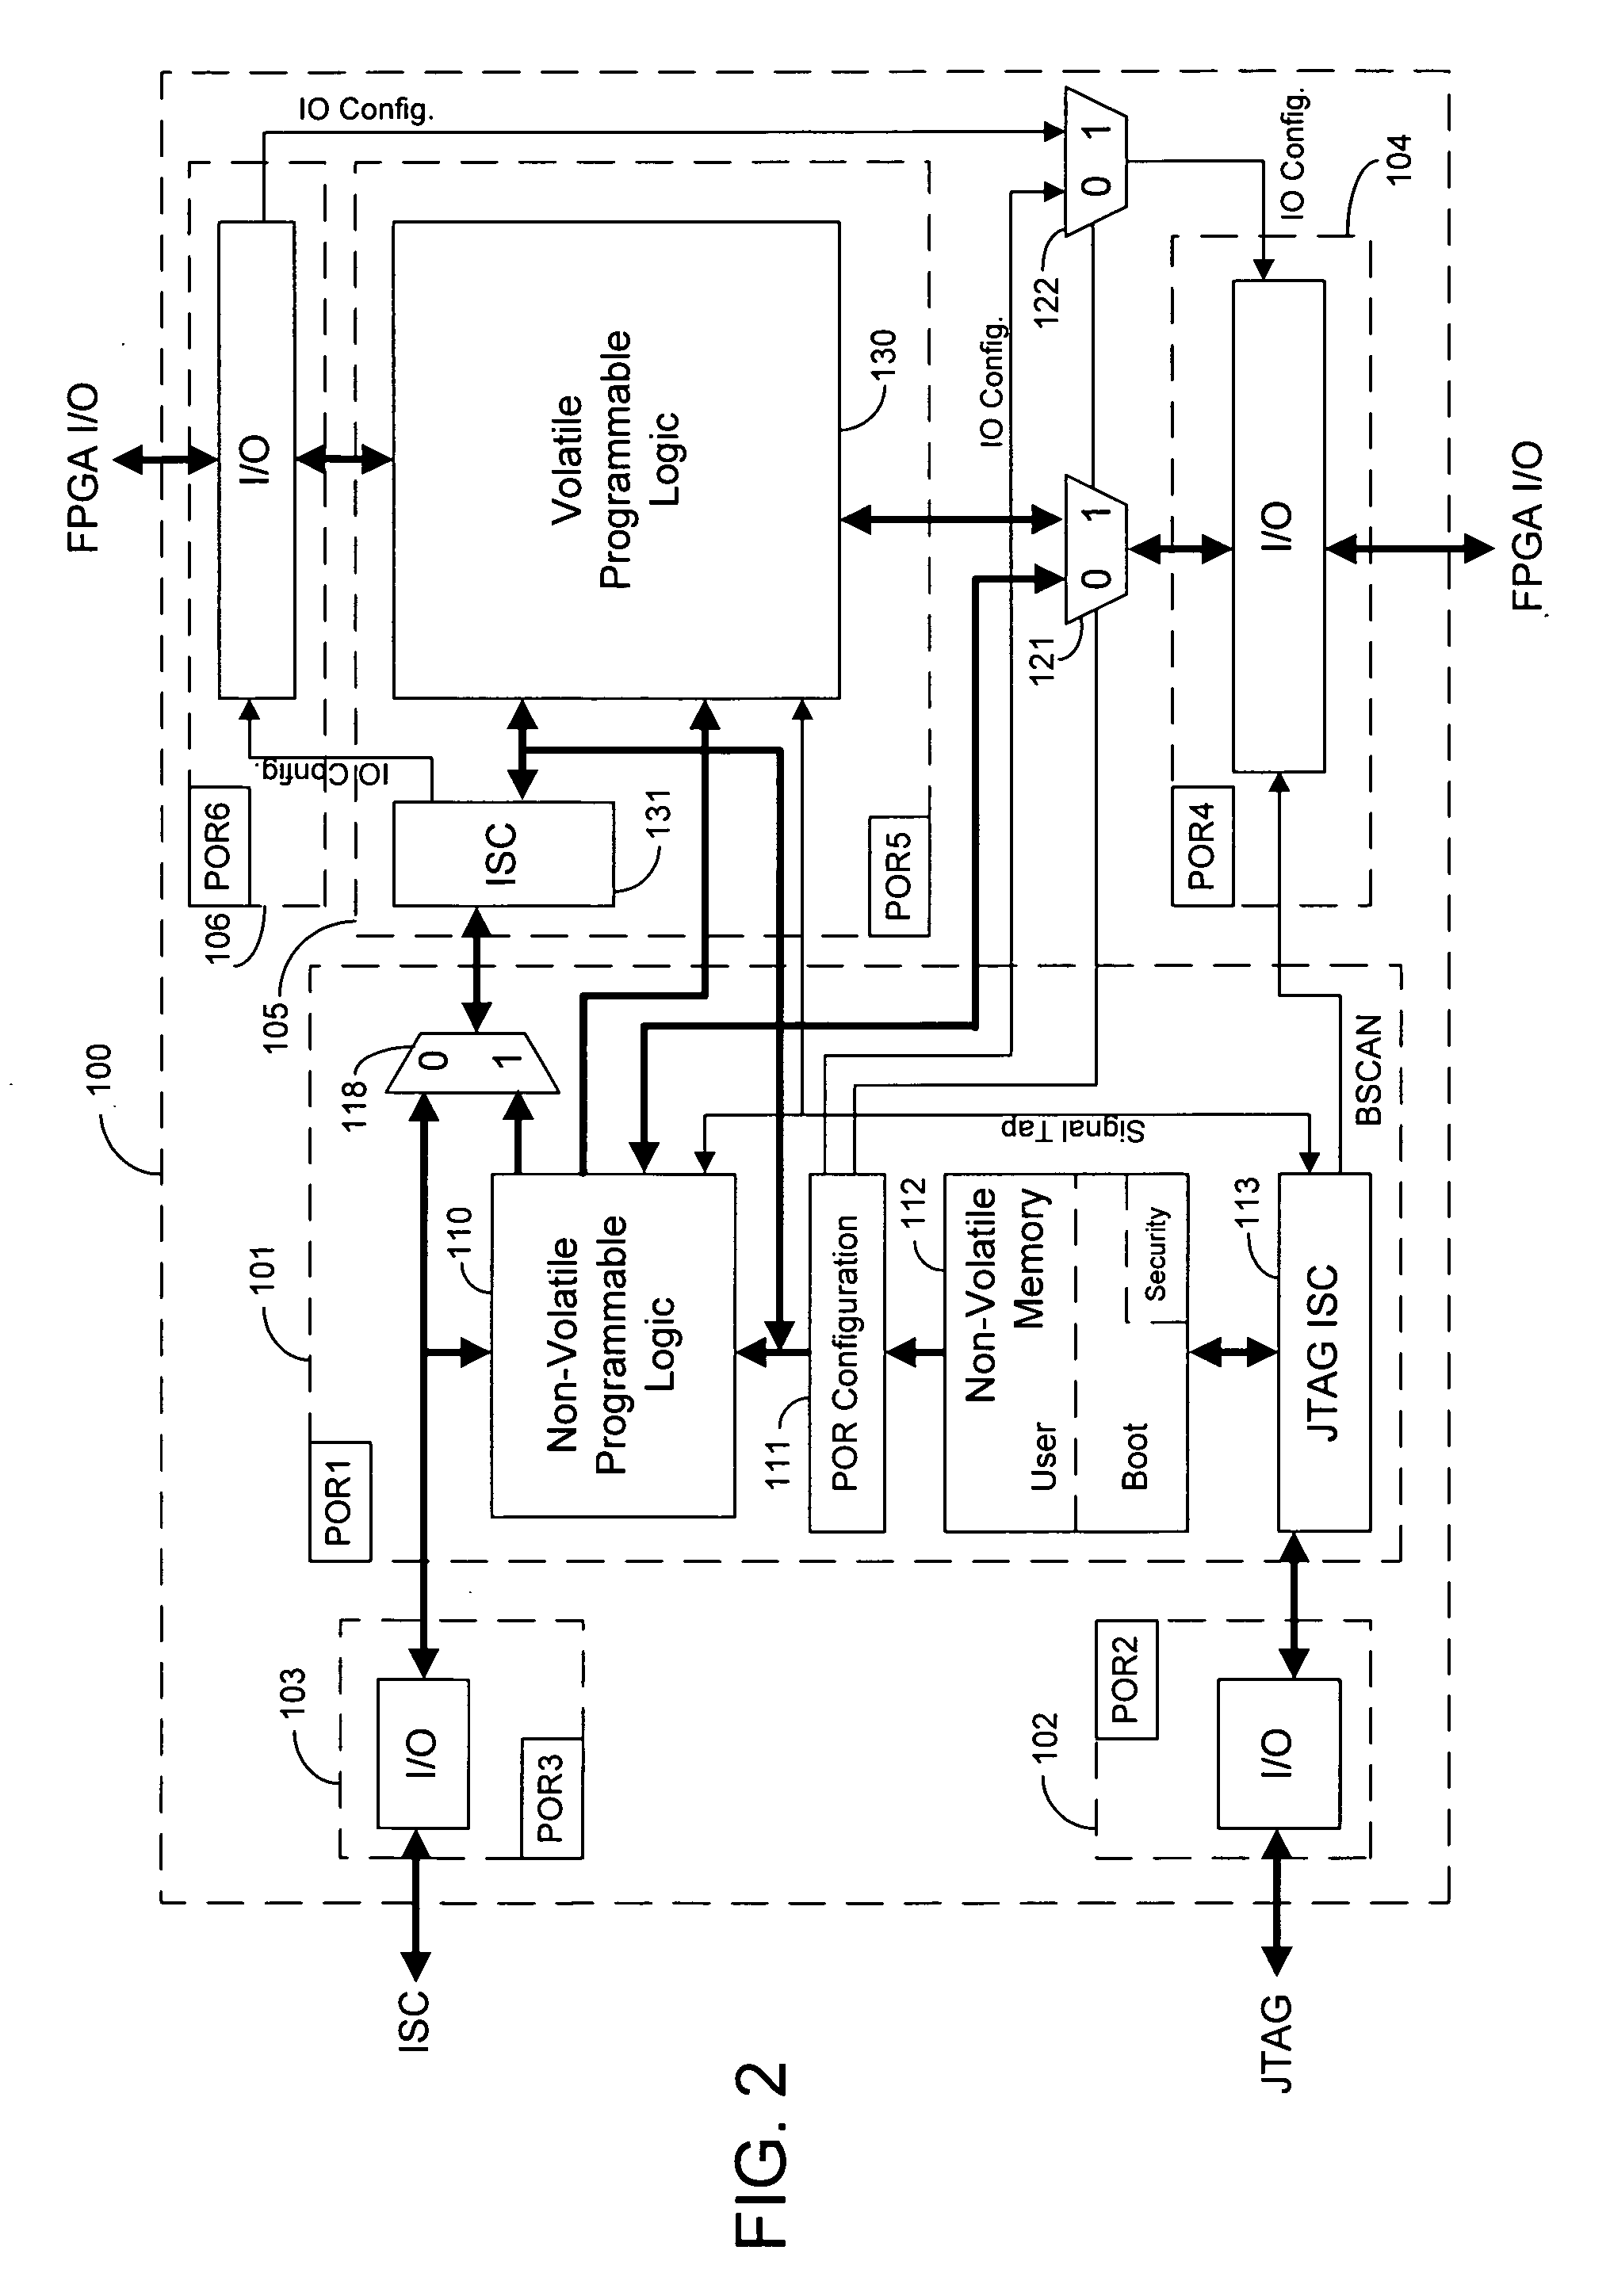 Techniques for combining volatile and non-volatile programmable logic on an integrated circuit